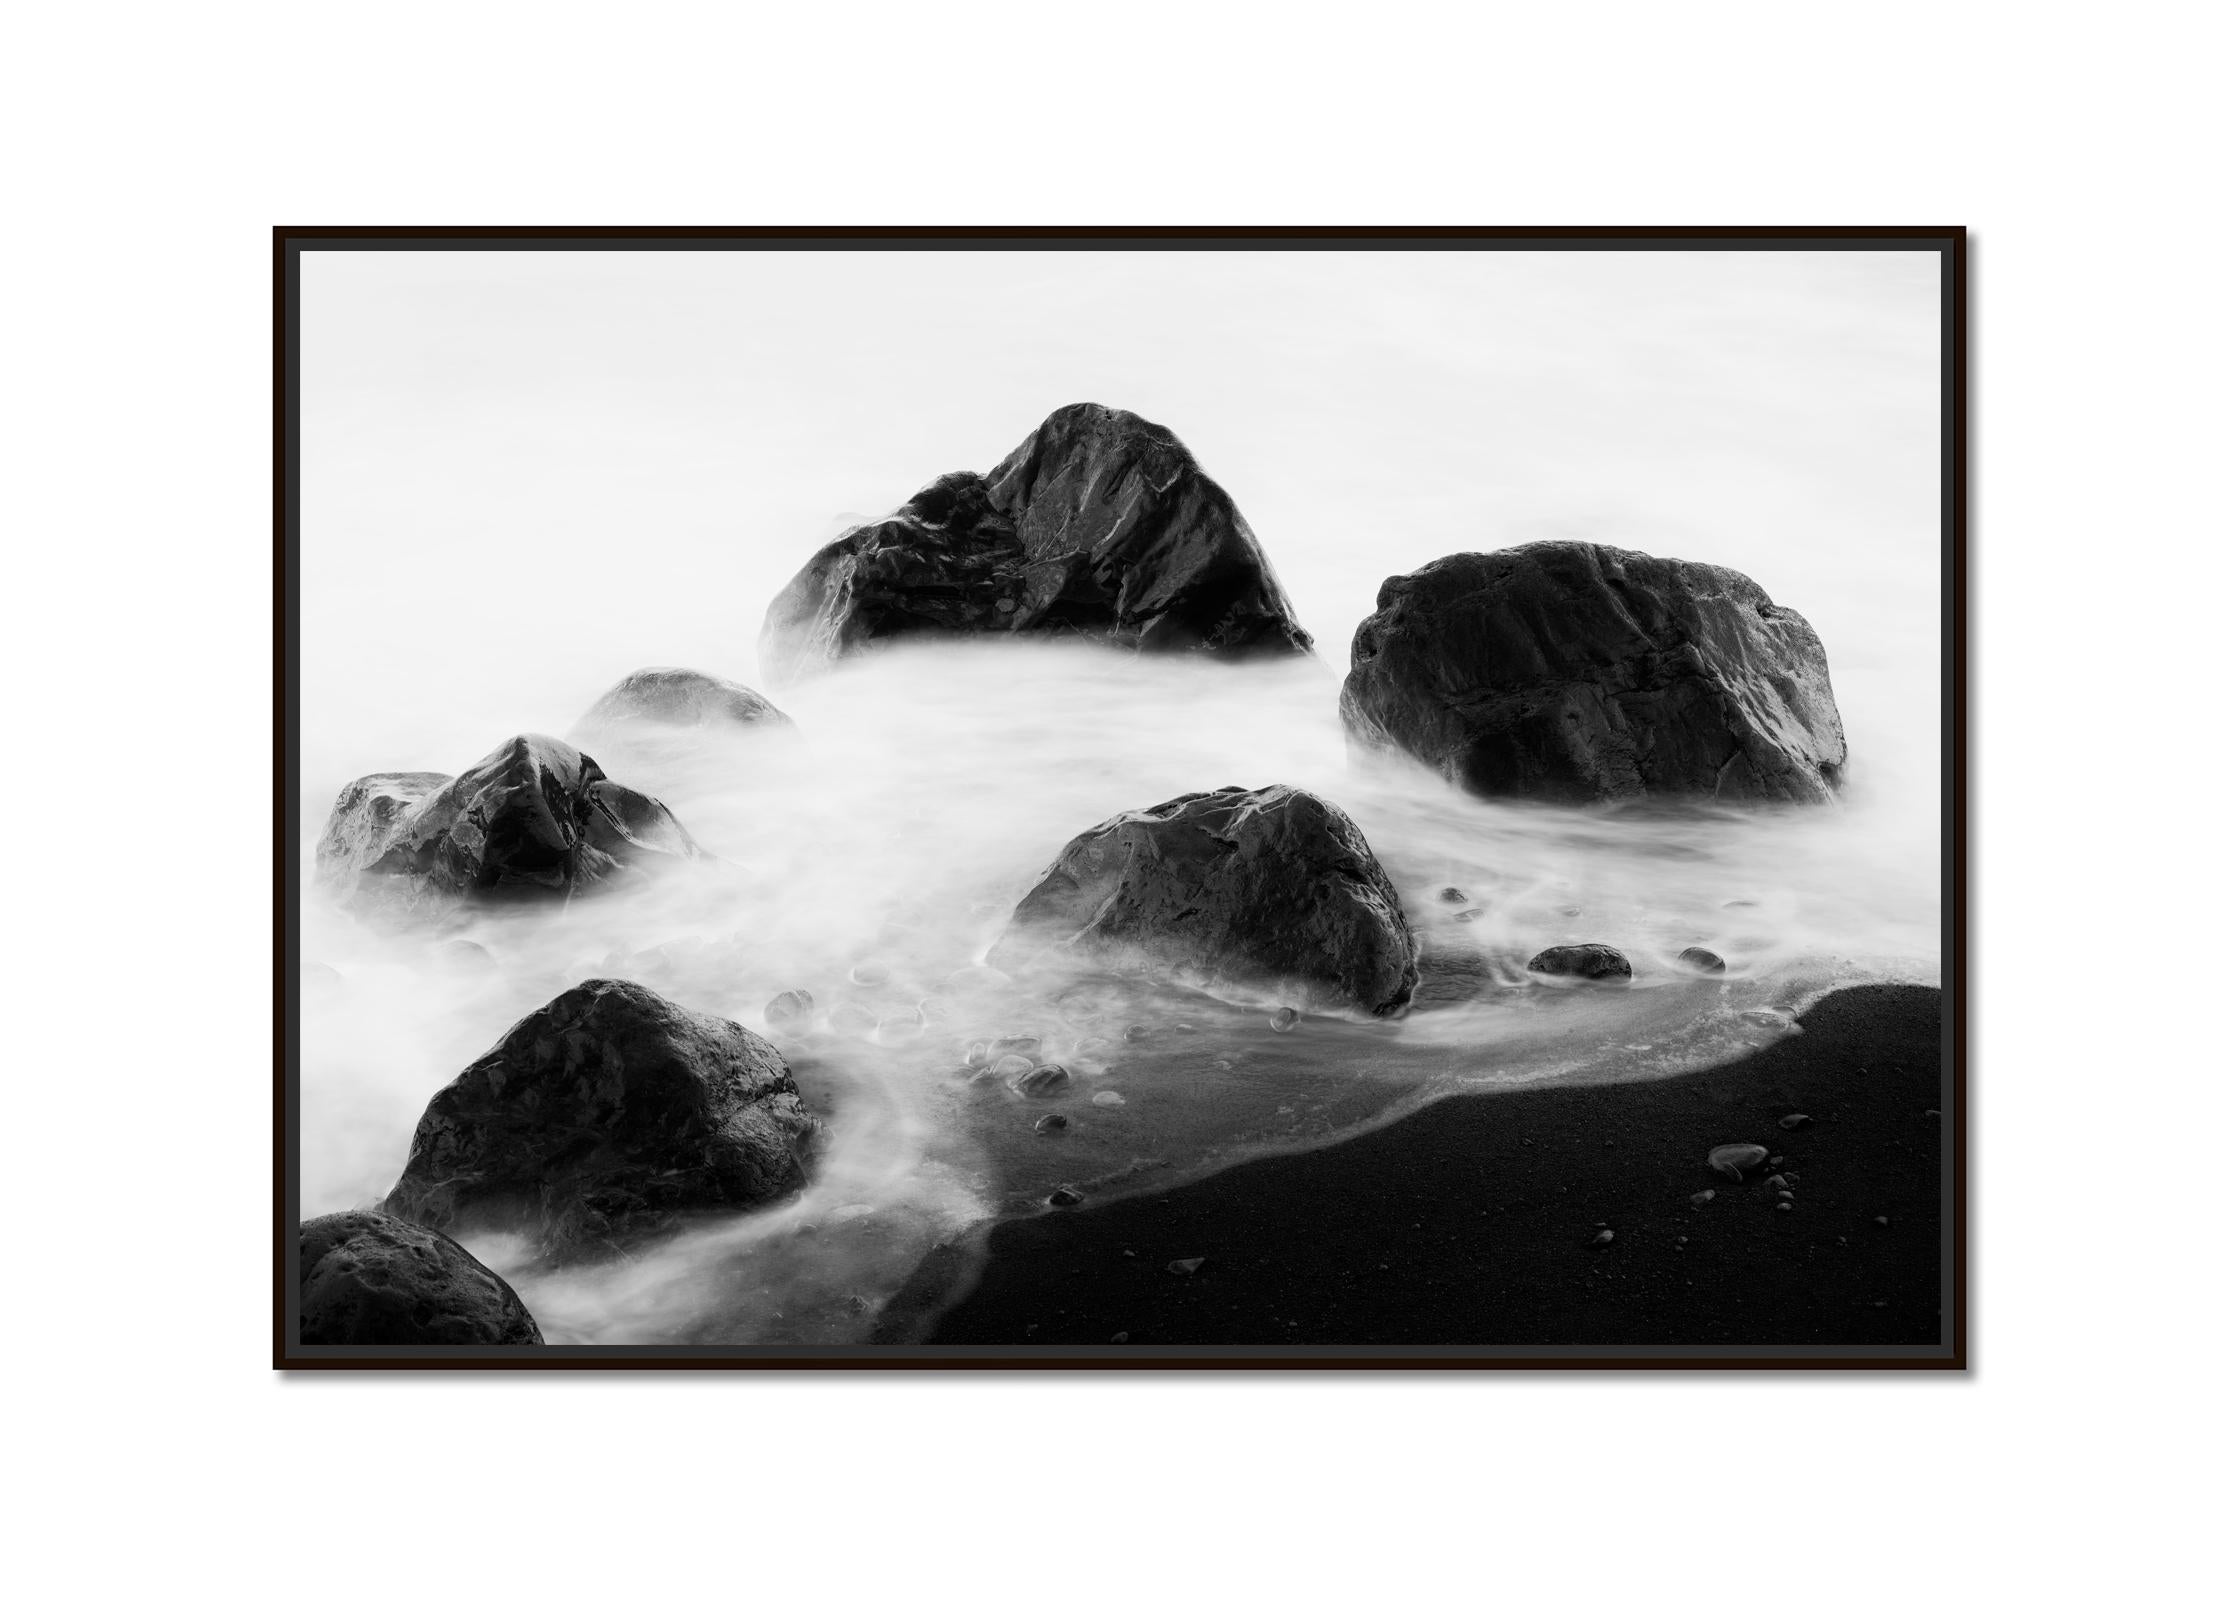 Black Rocks and a few Stones, black and white fine art photography, landscape - Photograph by Gerald Berghammer